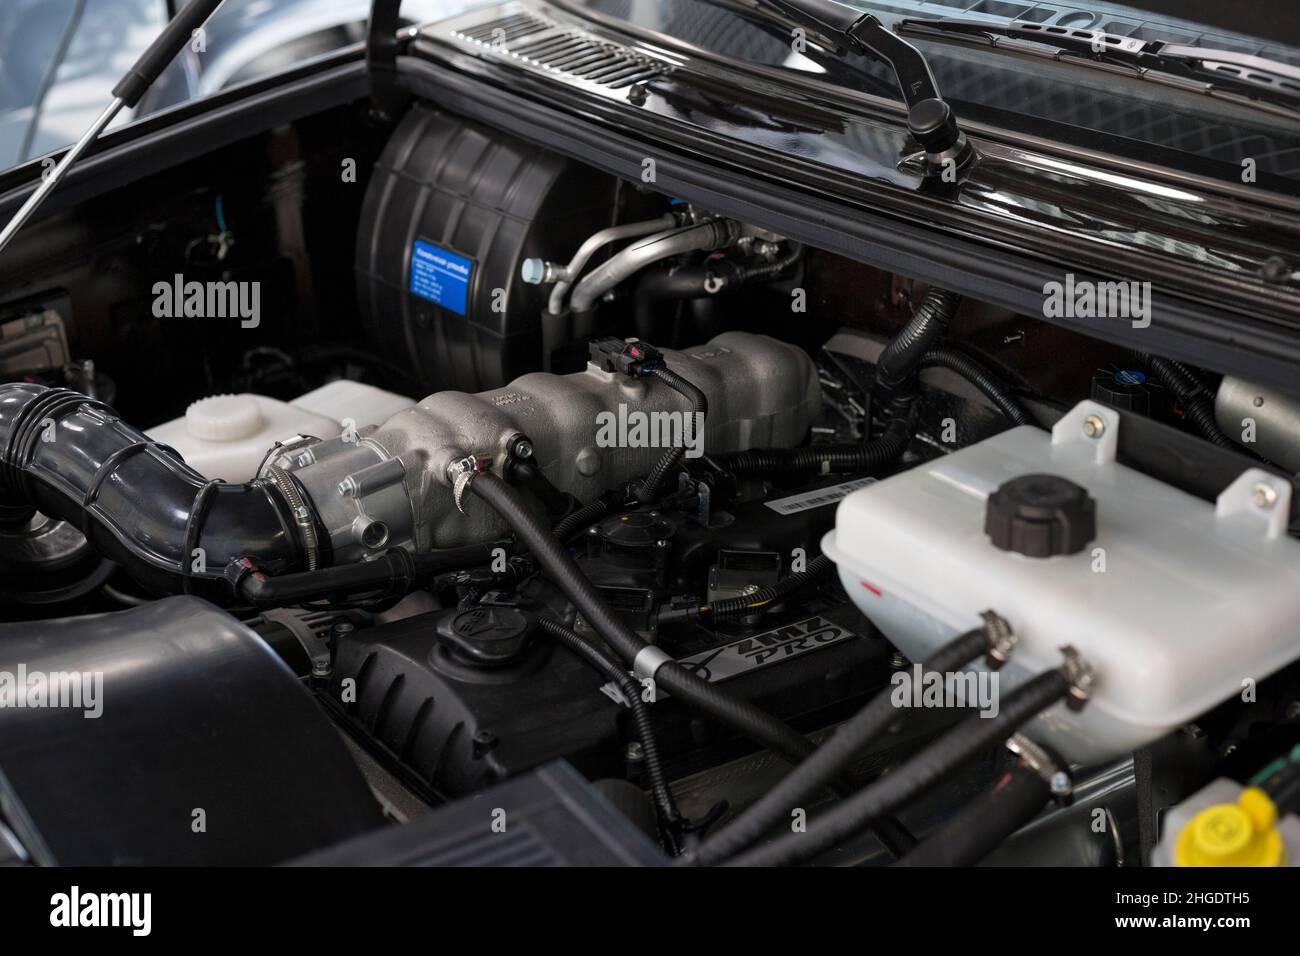 Russia, Izhevsk - August 20, 2021: UAZ showroom. Engine compartment of an internal combustion engine of new UAZ Patriot car. Sollers automotive group. Stock Photo